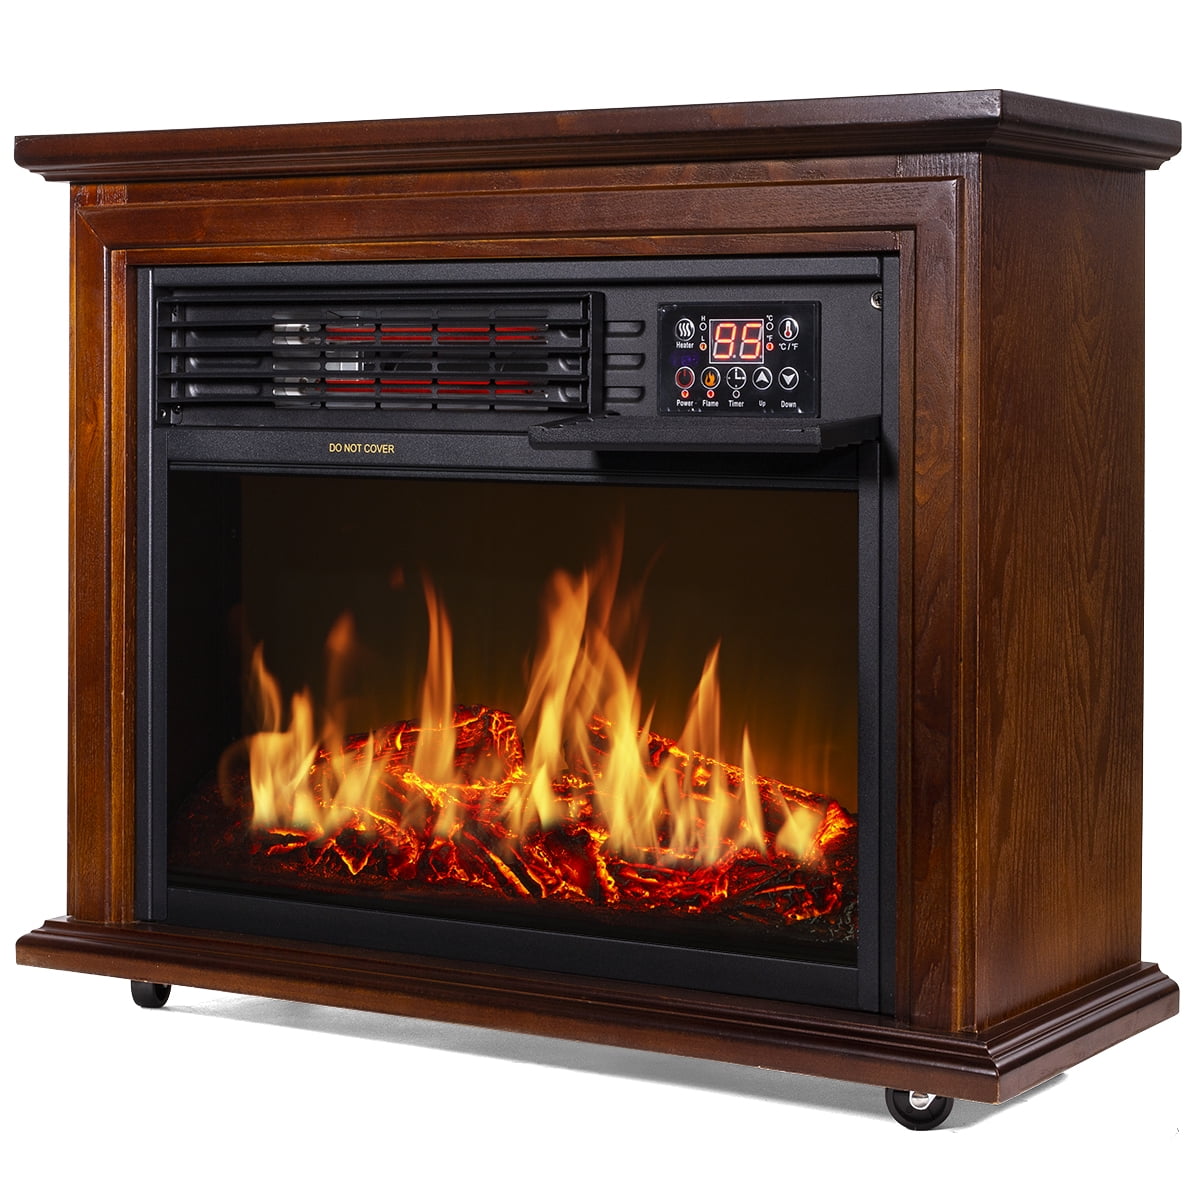 Della 1400W Deluxe Infrared Quartz Fireplace Heater Indoor Flame Wood Log Caster 